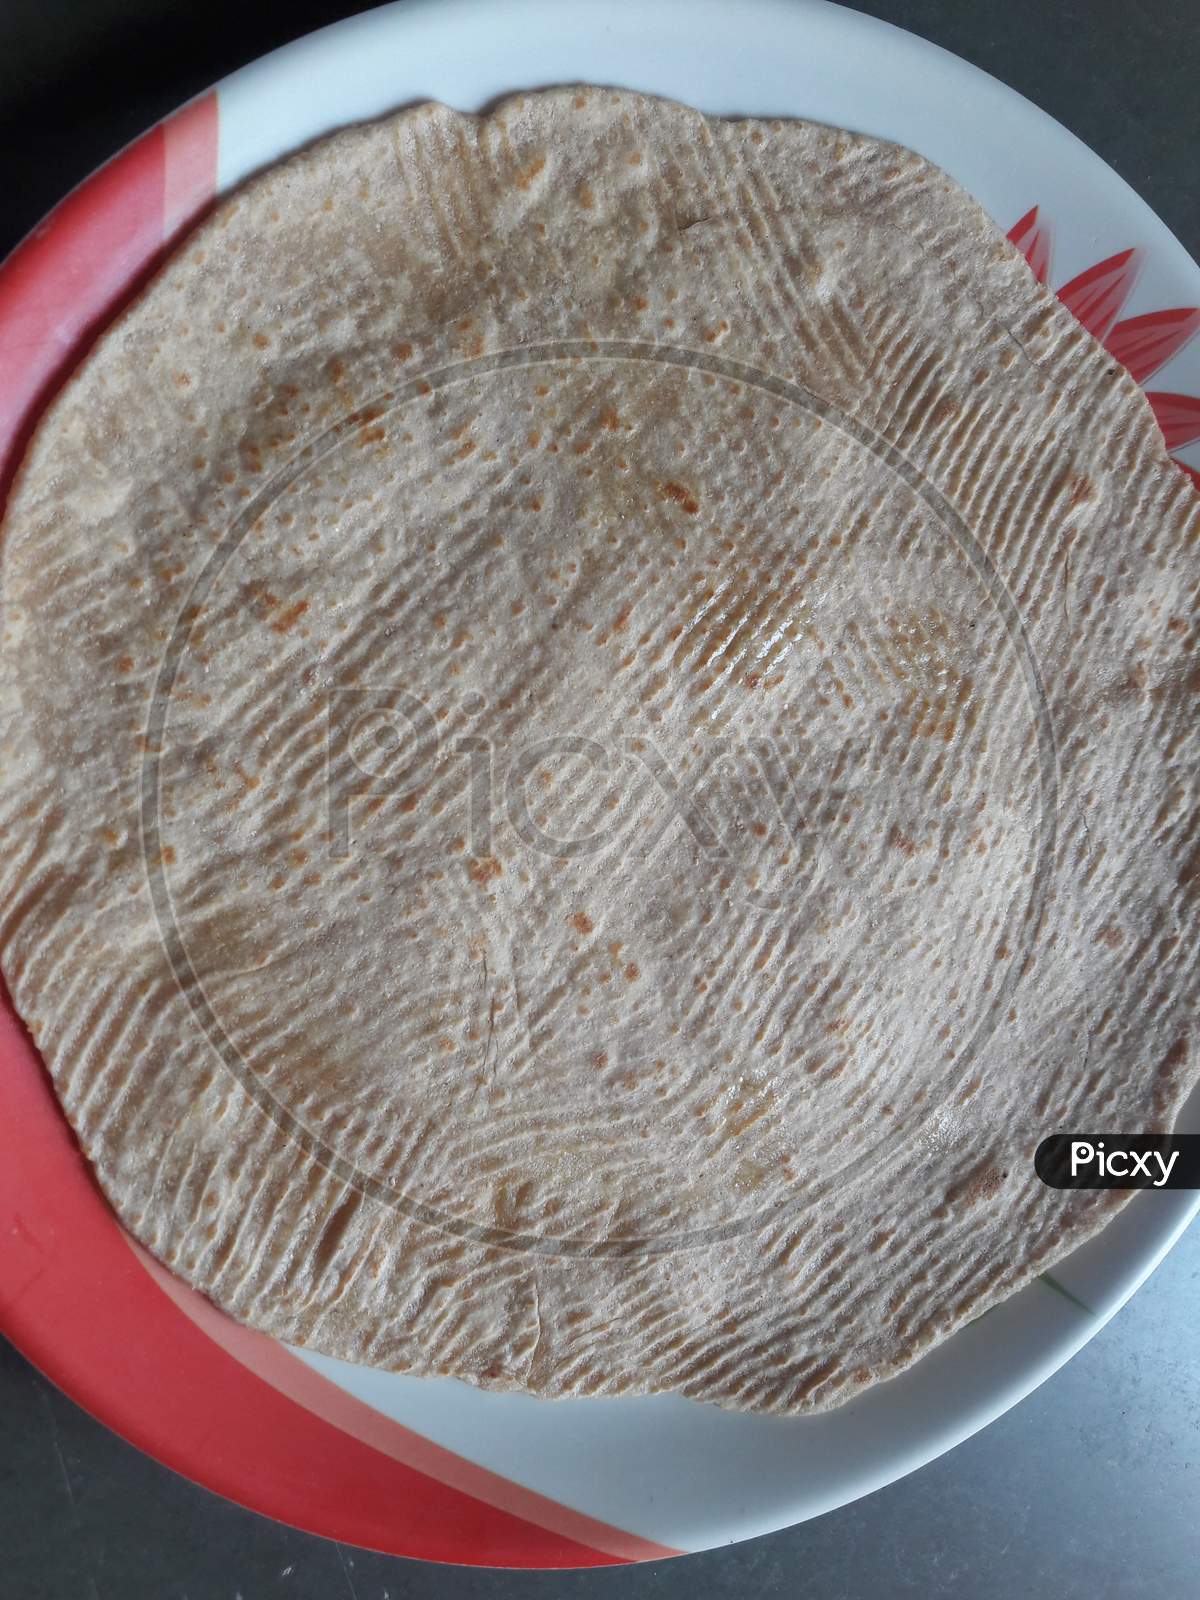 This is chapati